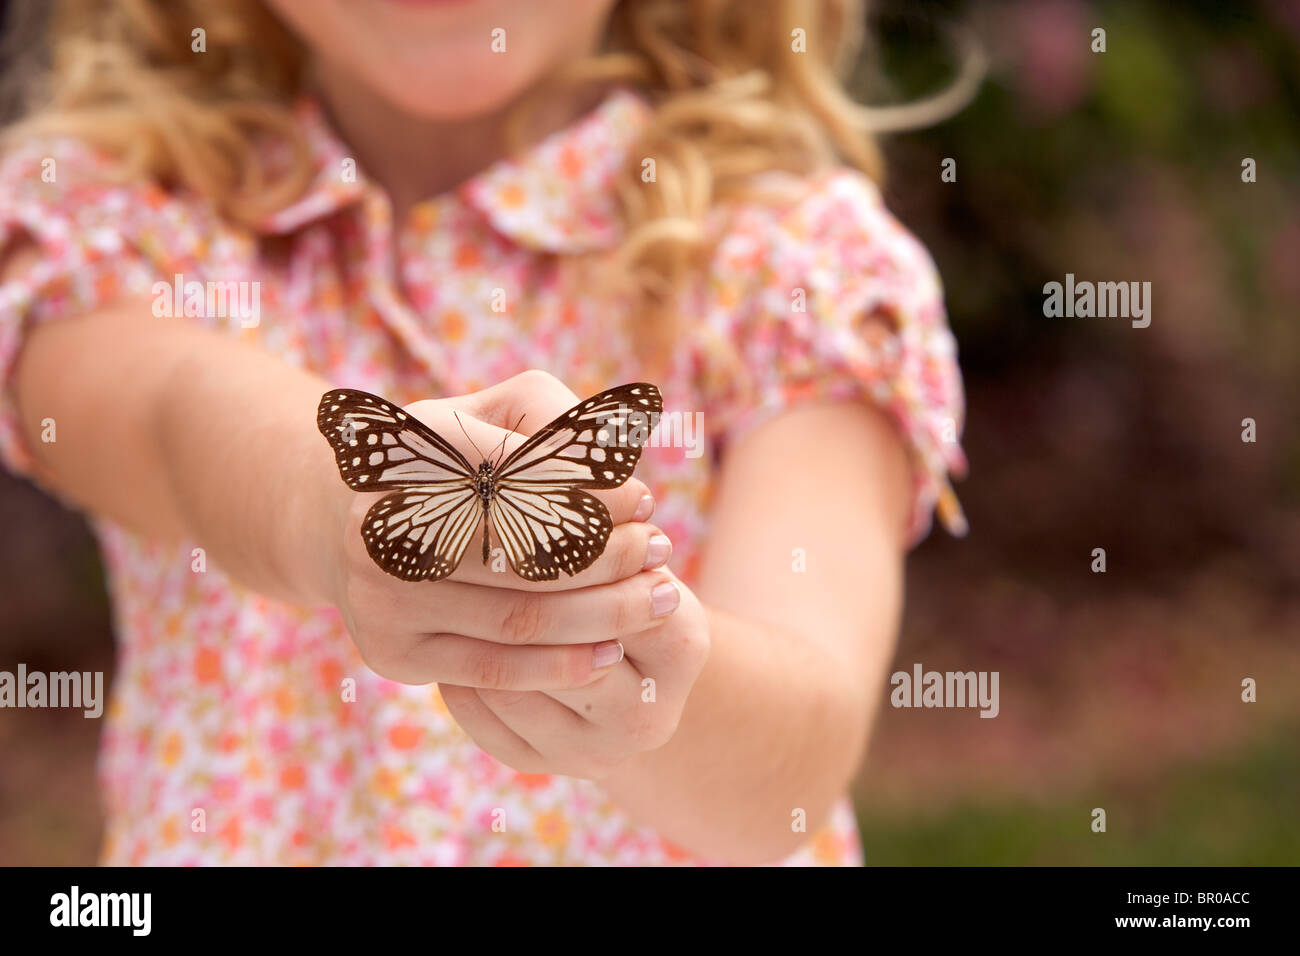 Young Caucasian girl holding a monarch butterfly. Stock Photo